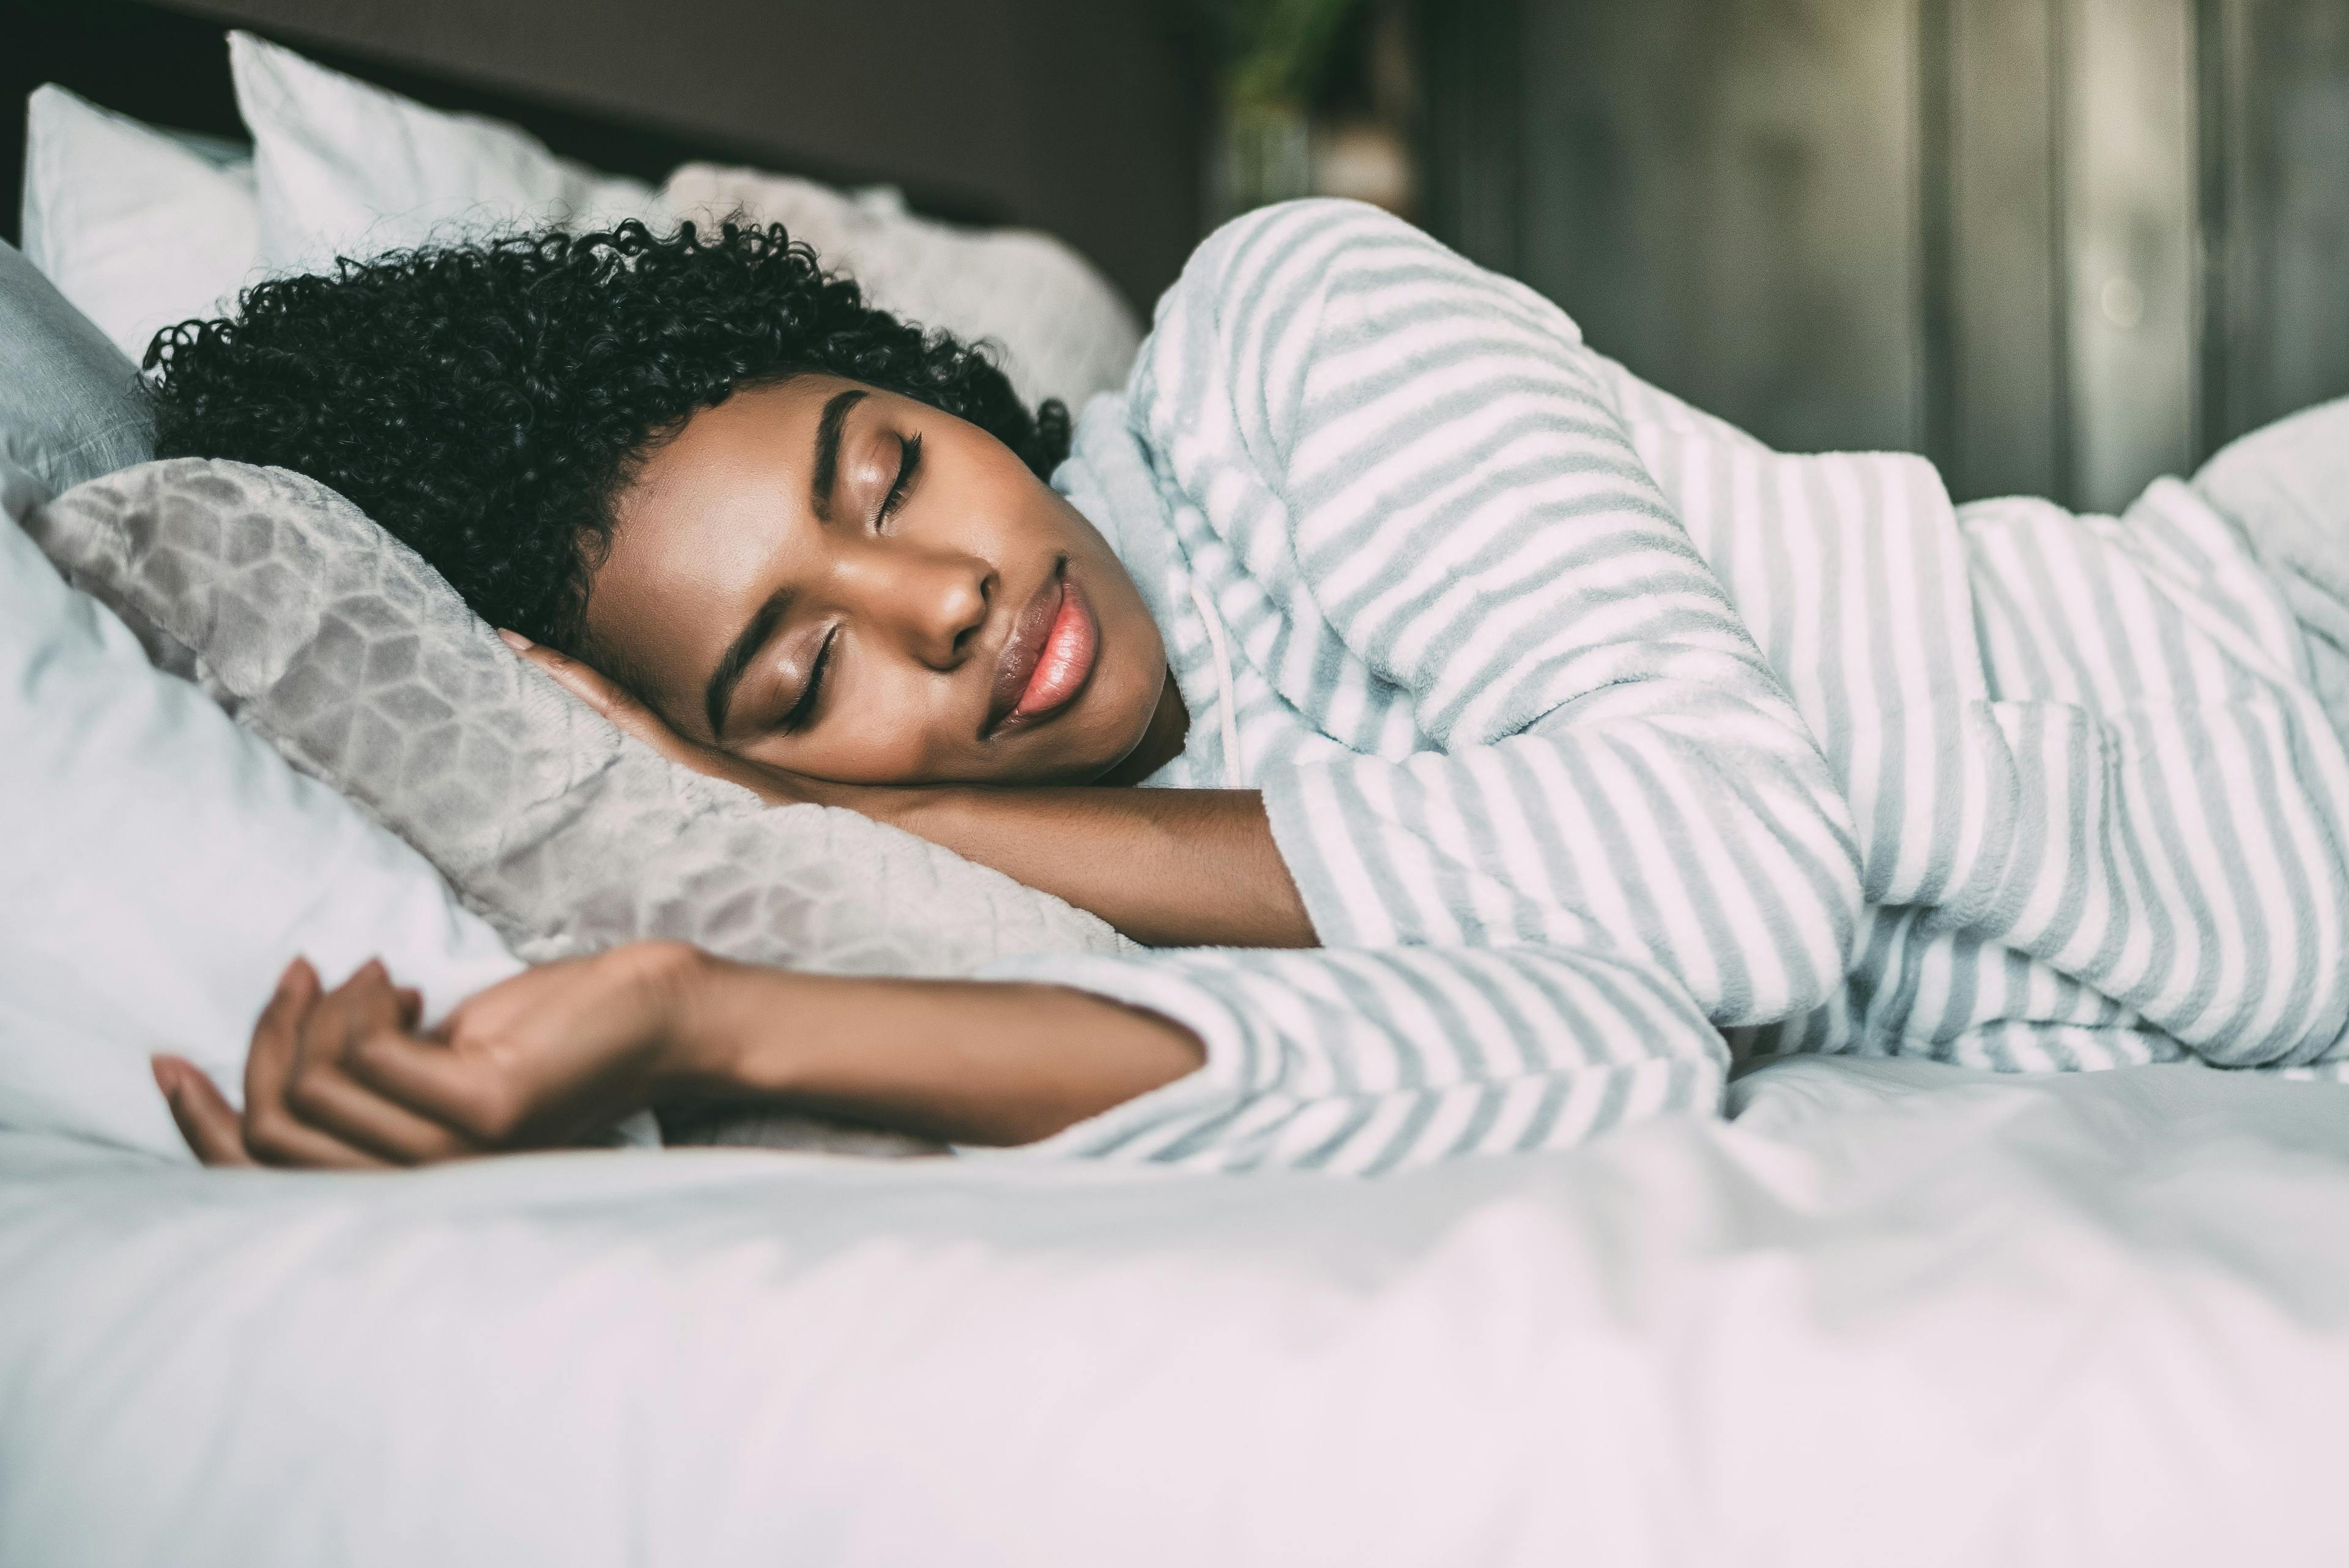 Here’s how we can help improve quality of sleep in both our patients and ourselves.